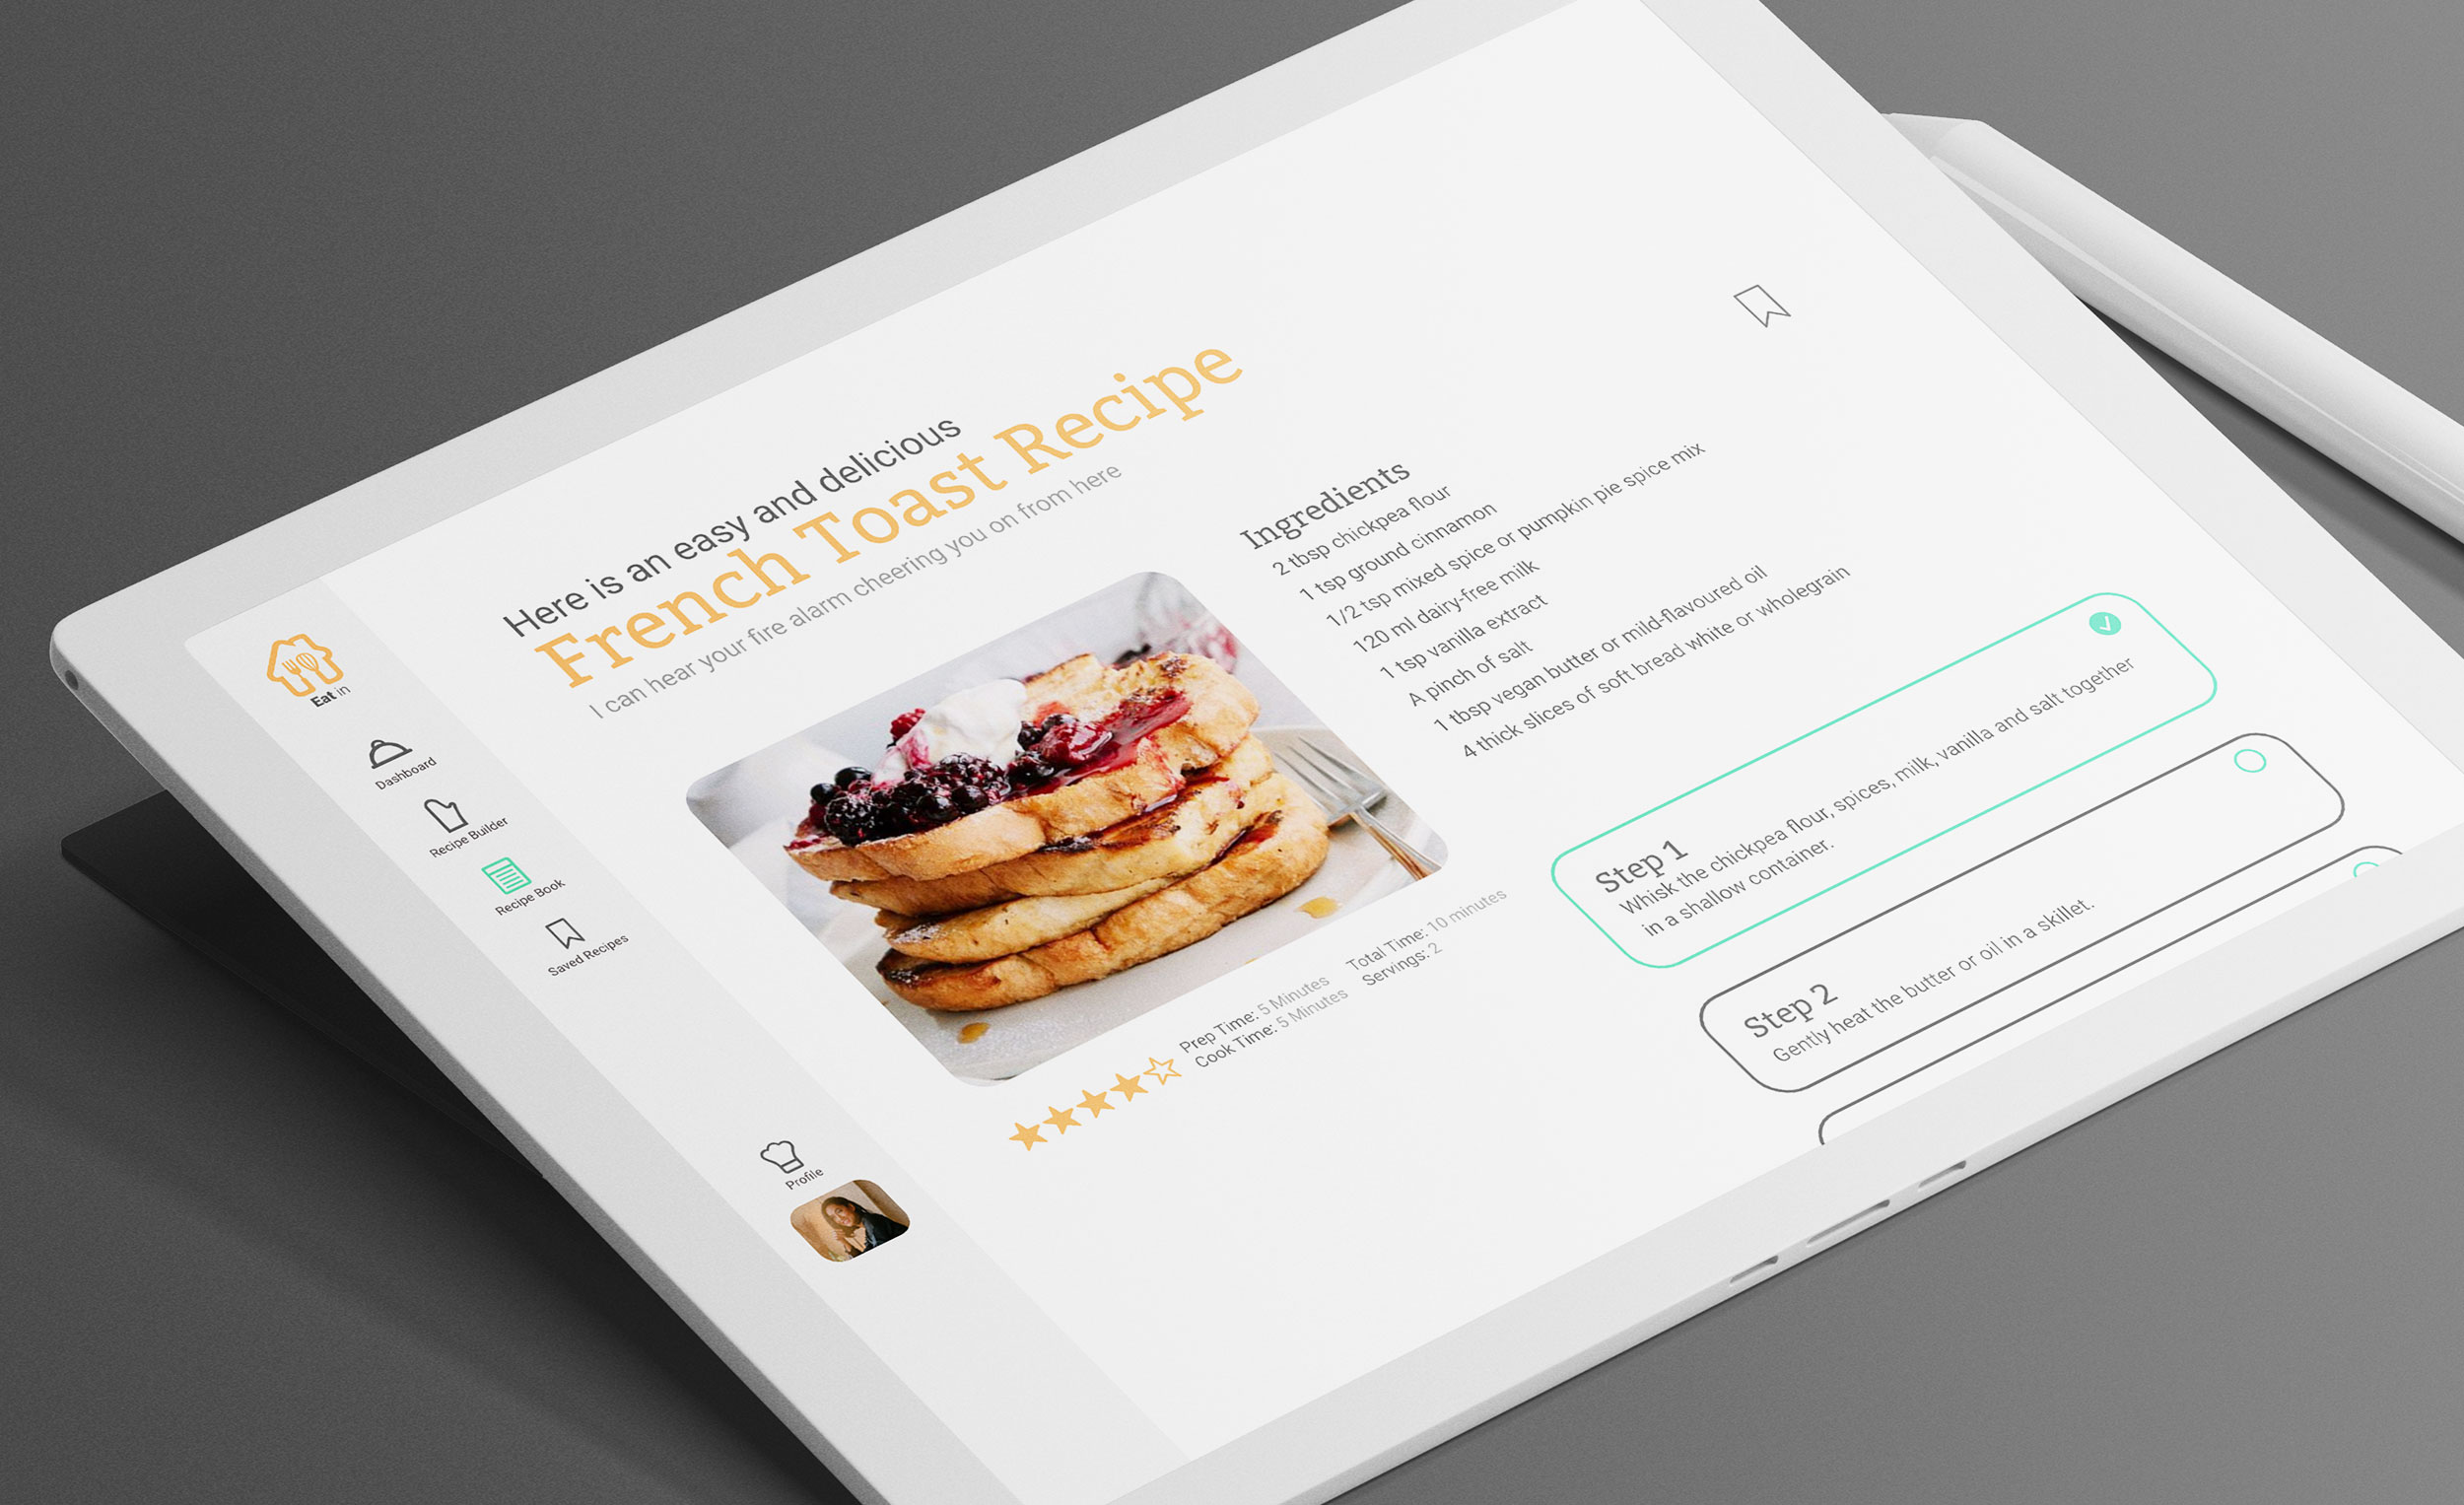 Eat in recipe screen on a tablet